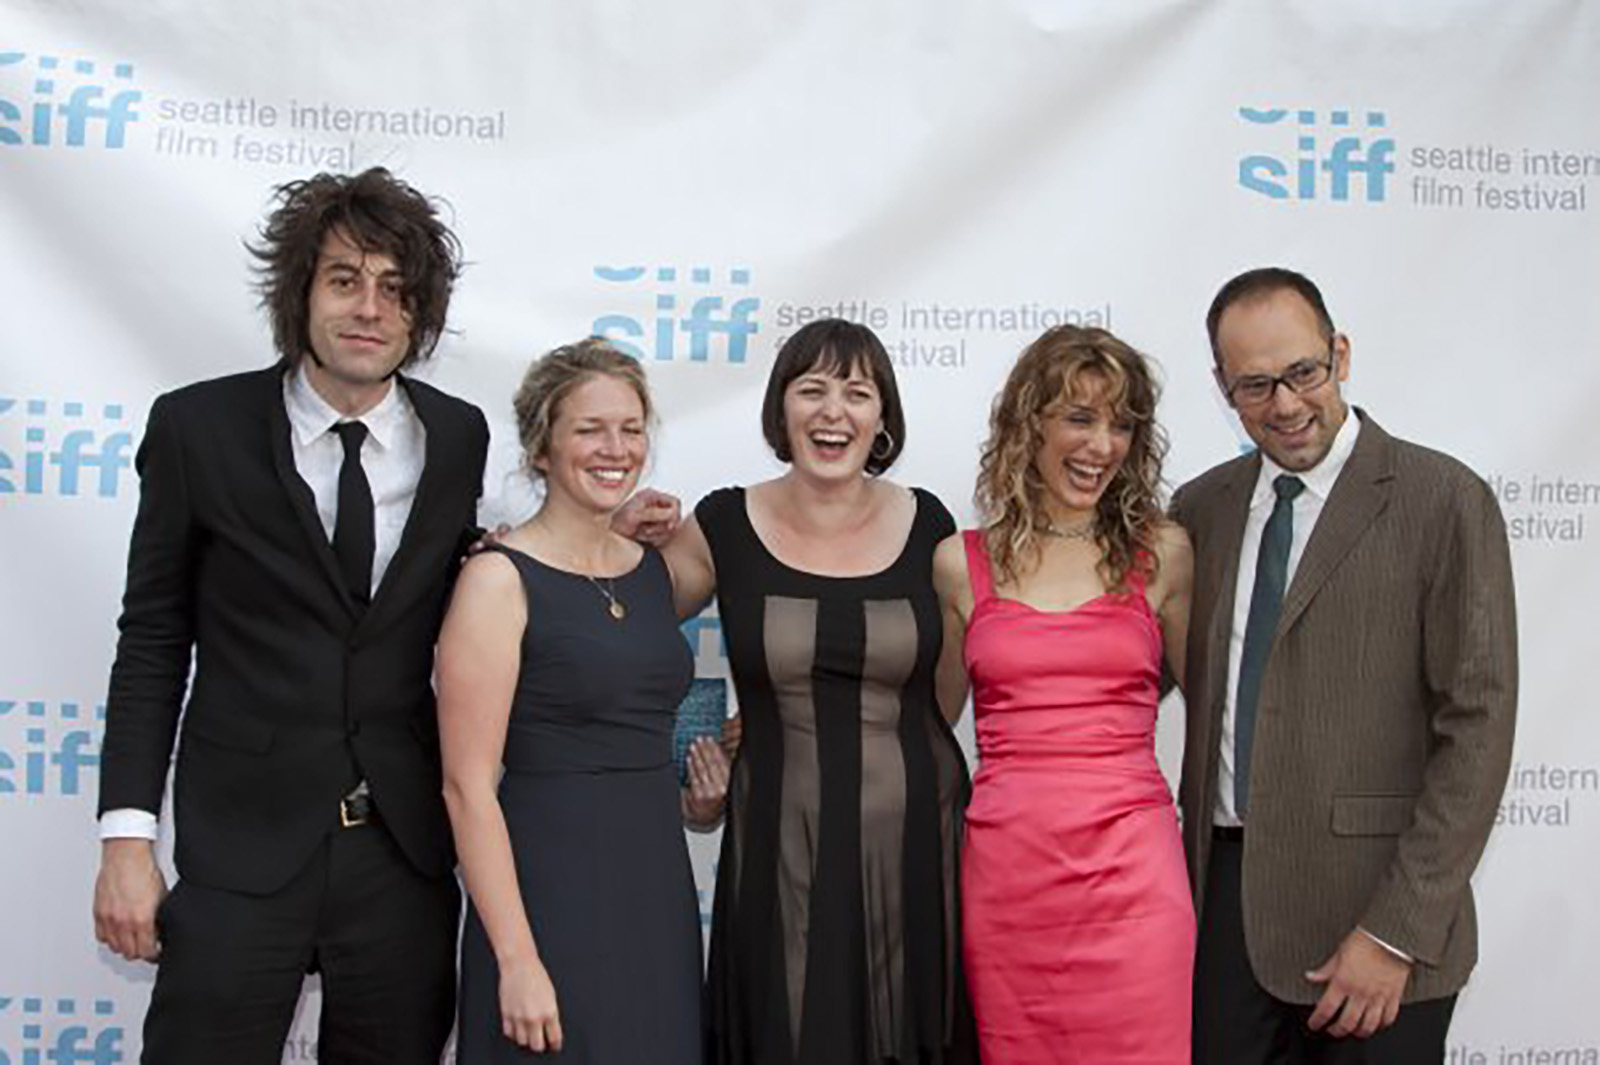 Guests from the film, Humpday, including director, Lynn Shelton, and acress, Alycia Delmore, gather on the red carpet with SIFF's Artistic Director, Carl Spence, for the Centerpiece Film & Gala